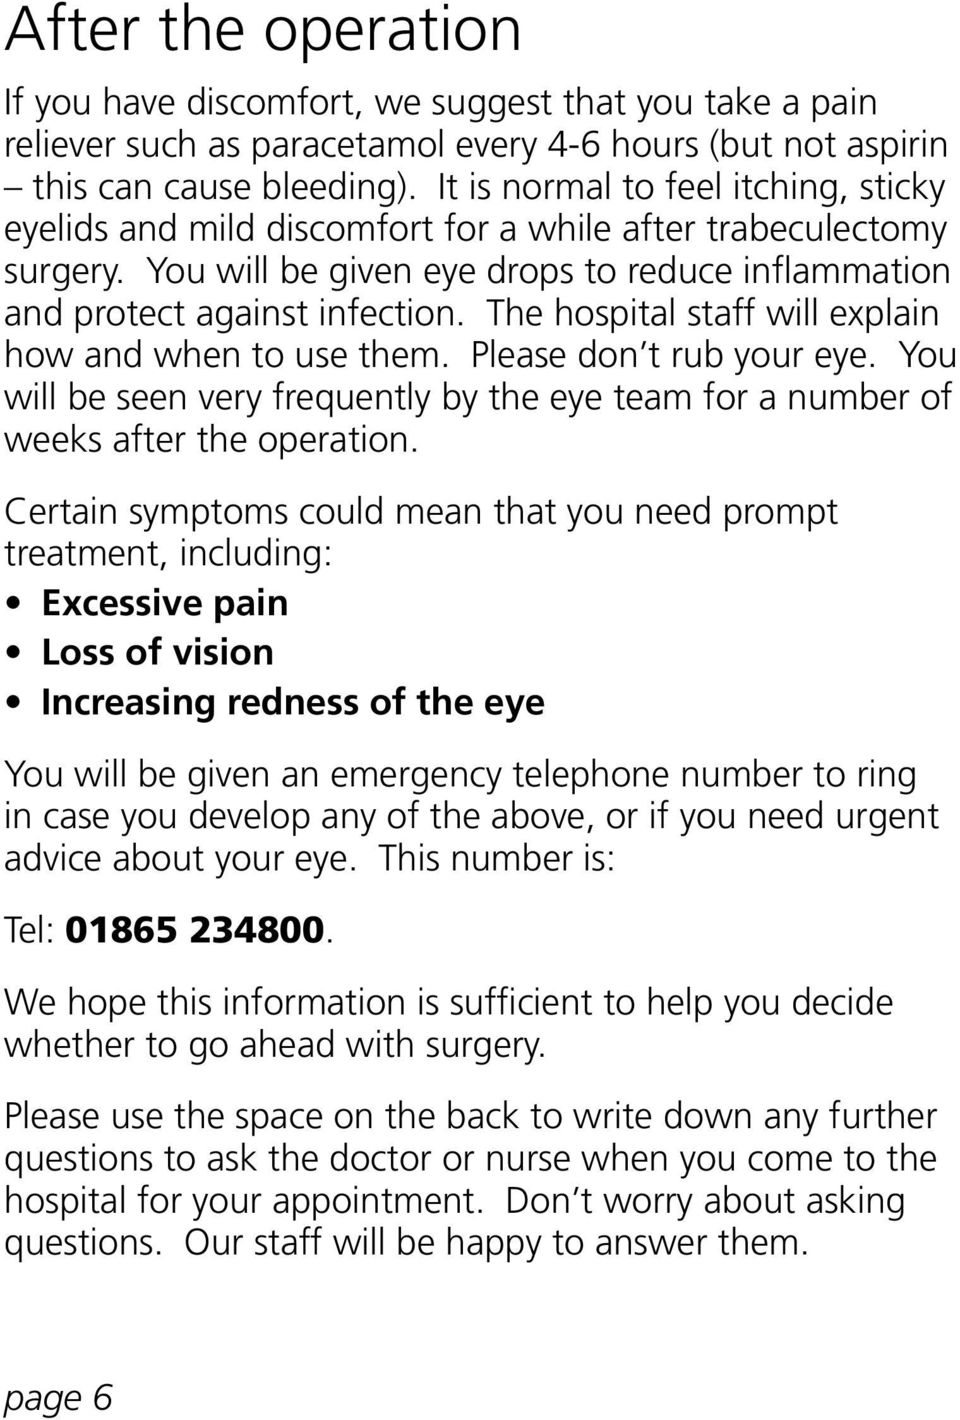 The hospital staff will explain how and when to use them. Please don t rub your eye. You will be seen very frequently by the eye team for a number of weeks after the operation.